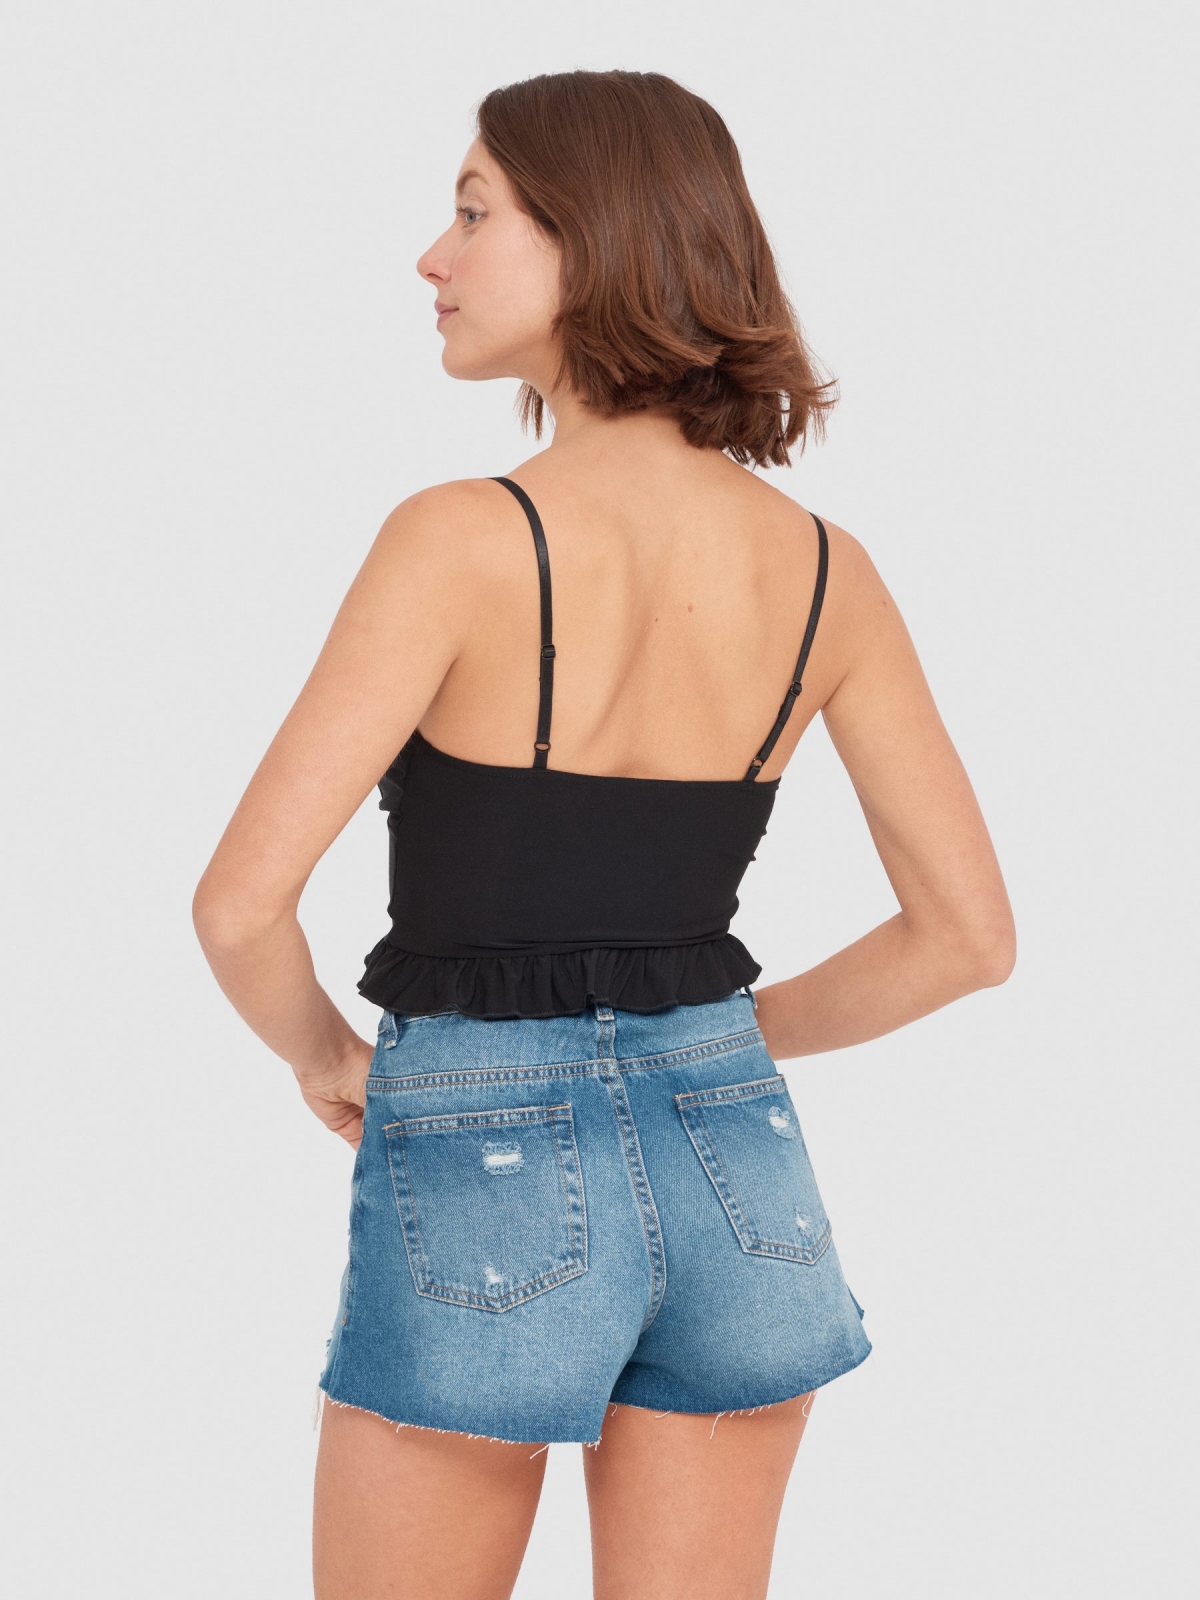 Curly waist top black middle back view